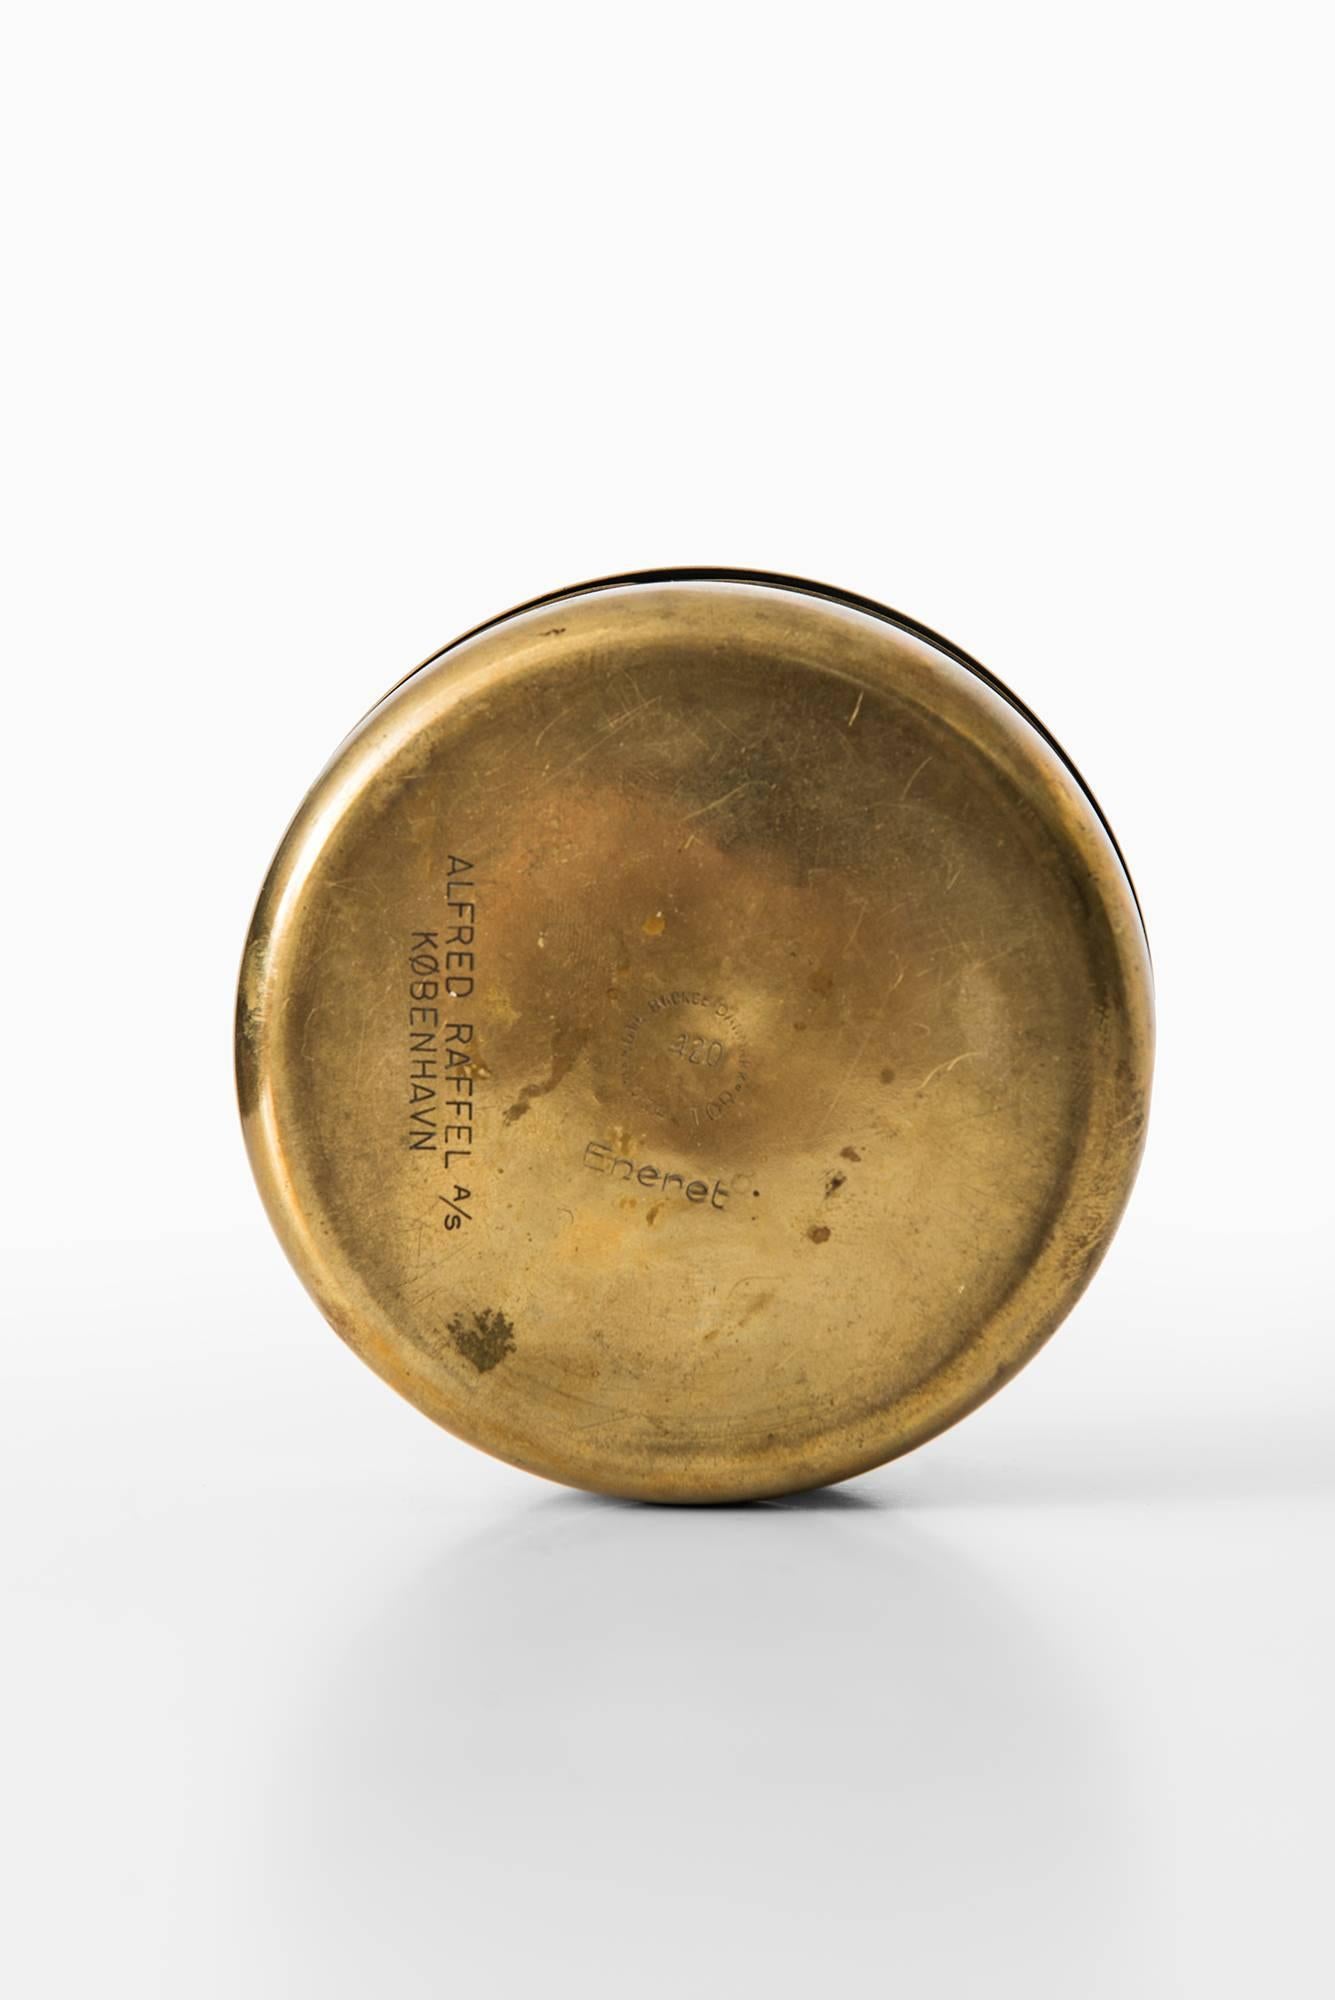 Ashtray in brass. Produced by Alfred Raffel A/S in Denmark.